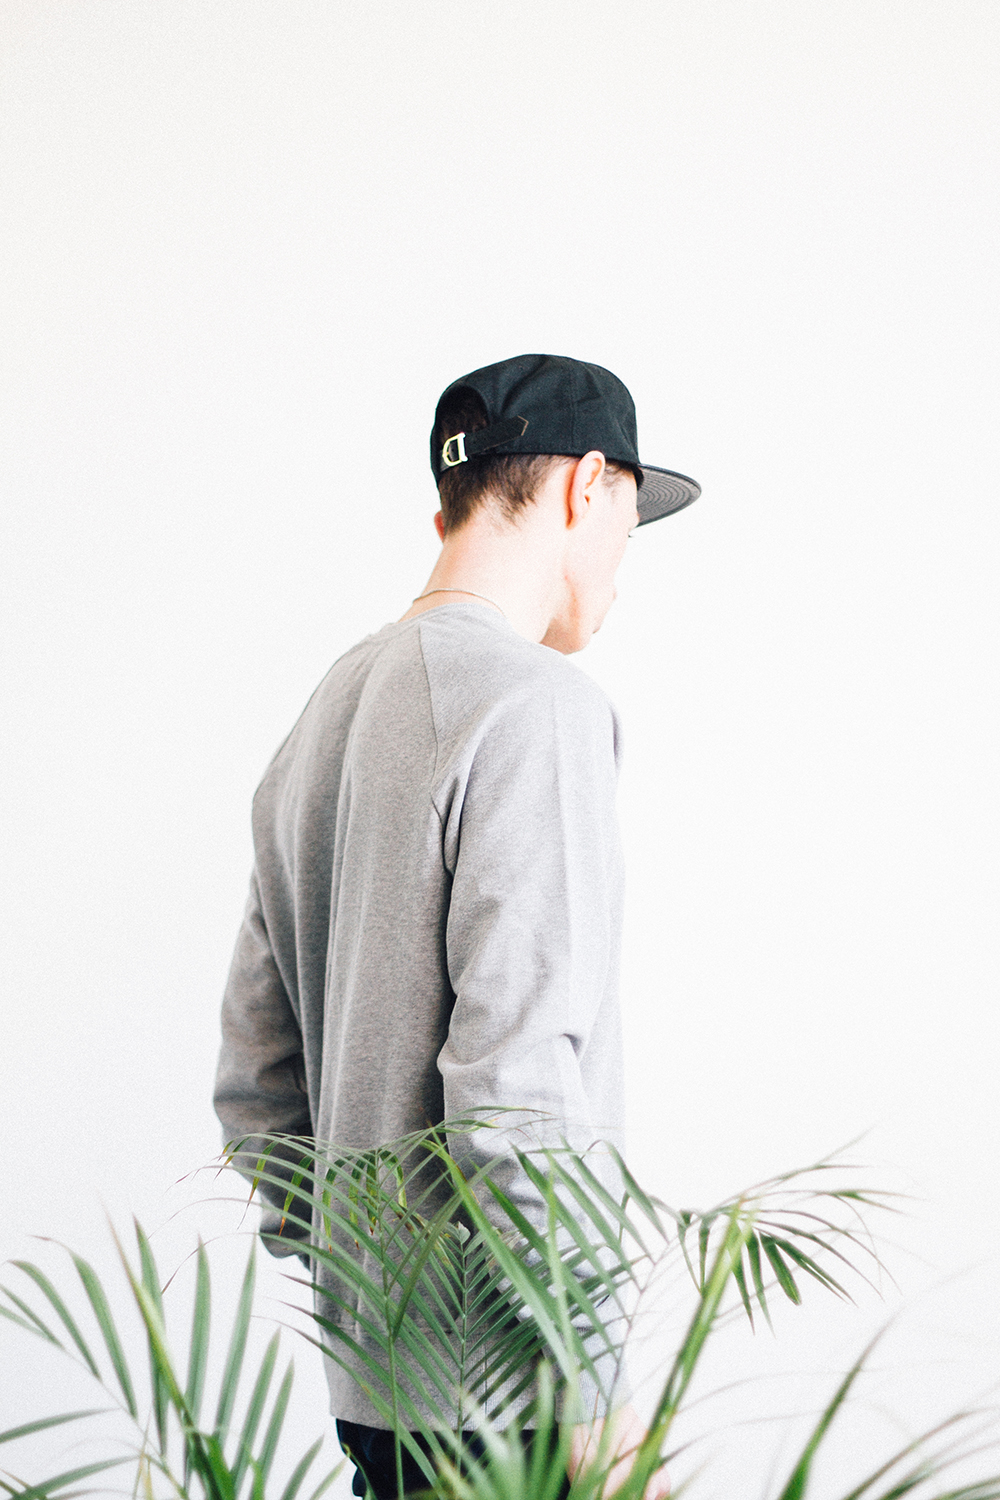 Swelly Clothing S/S15 Lookbook